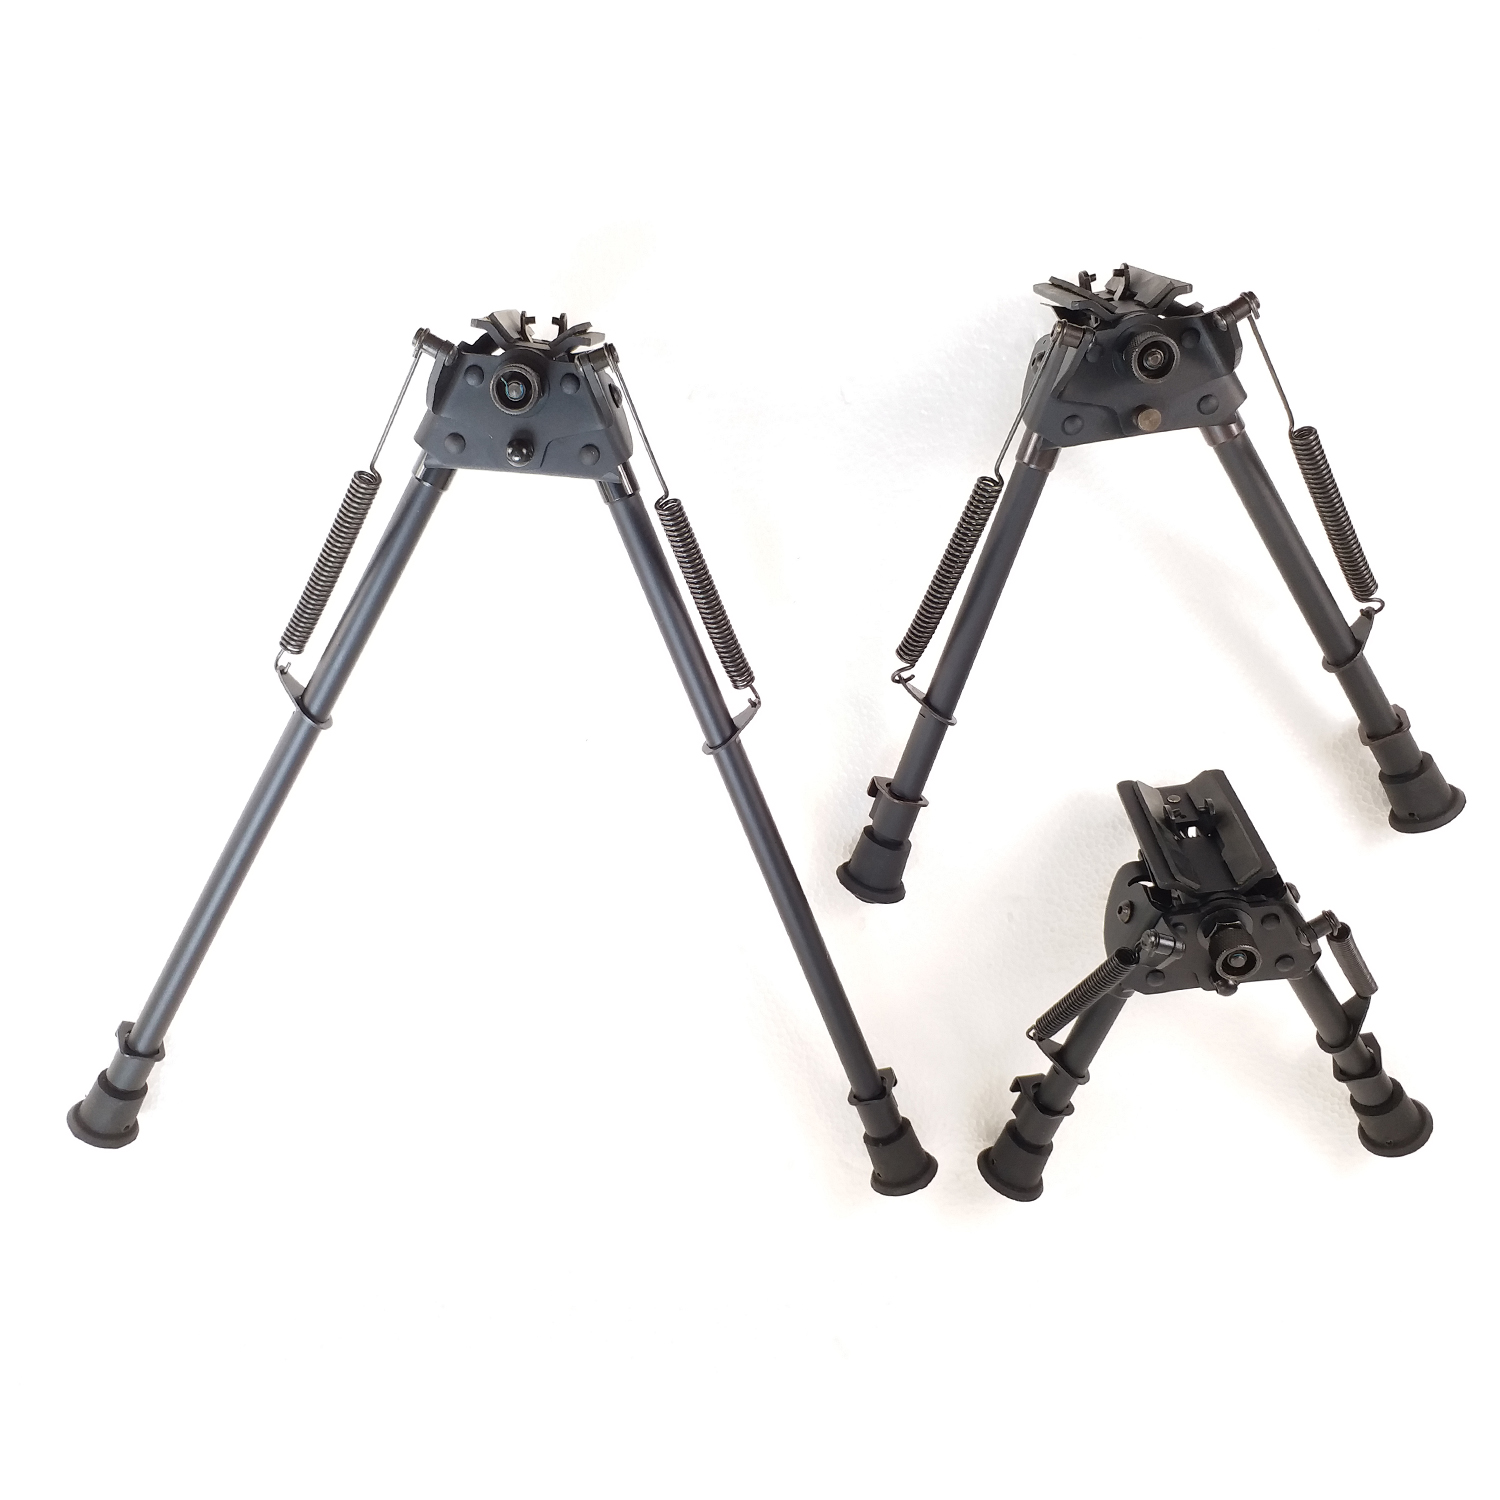 6-9,9-13,13-21 Inch Harris Style Bipod Tiltable Pivot Spring Return adjustable and Locked height BE-xB